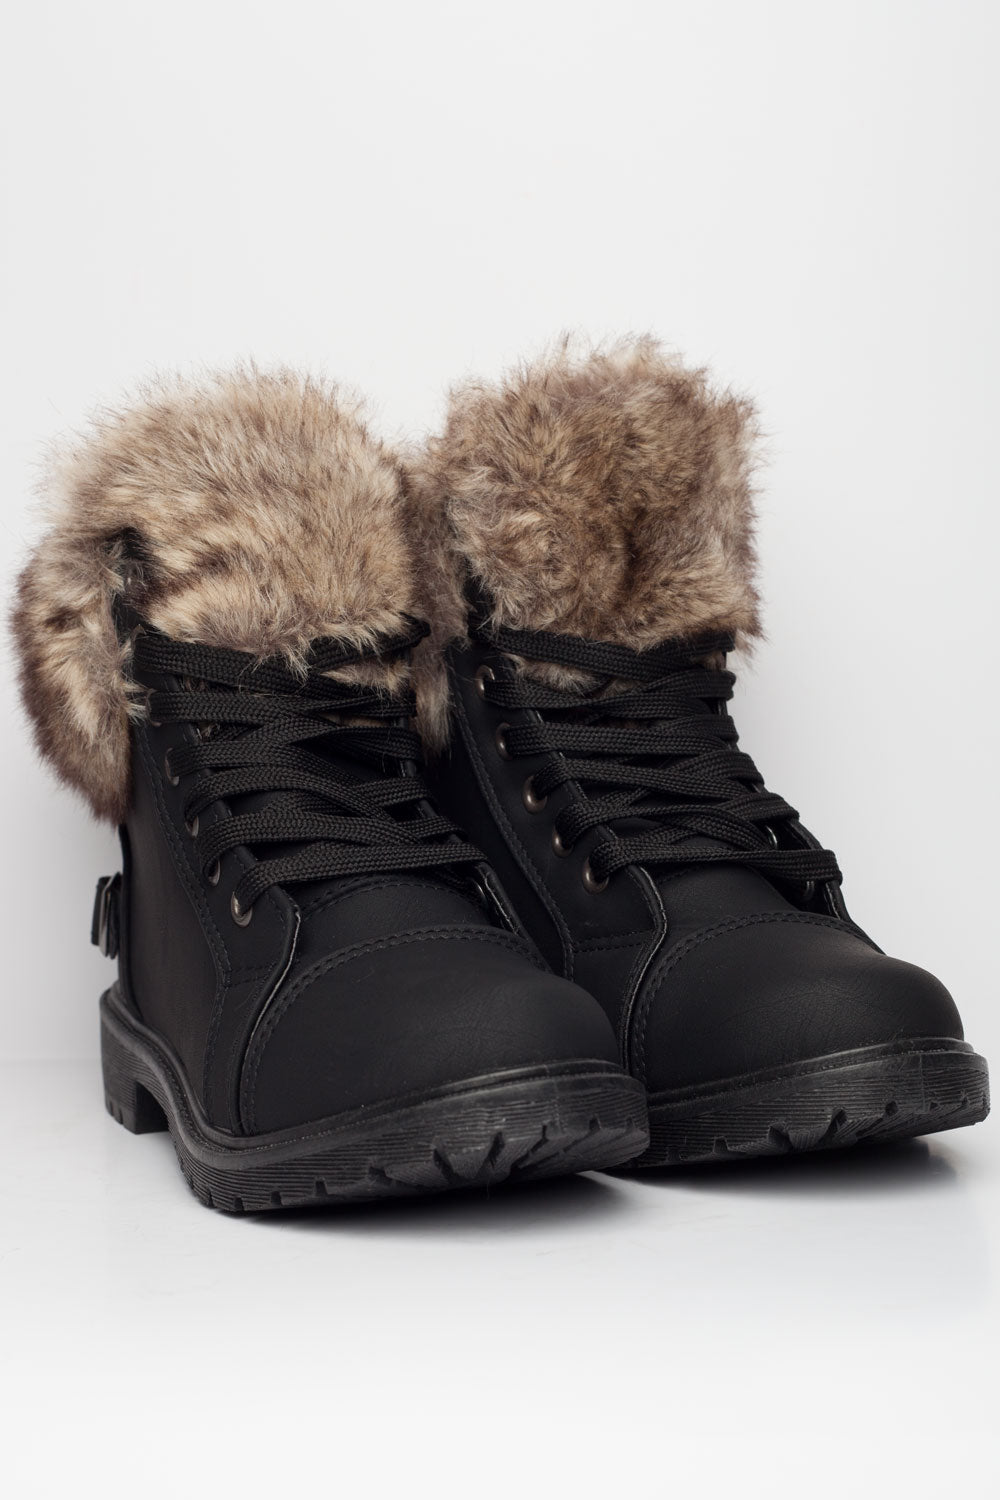 ladies winter ankle boots uk